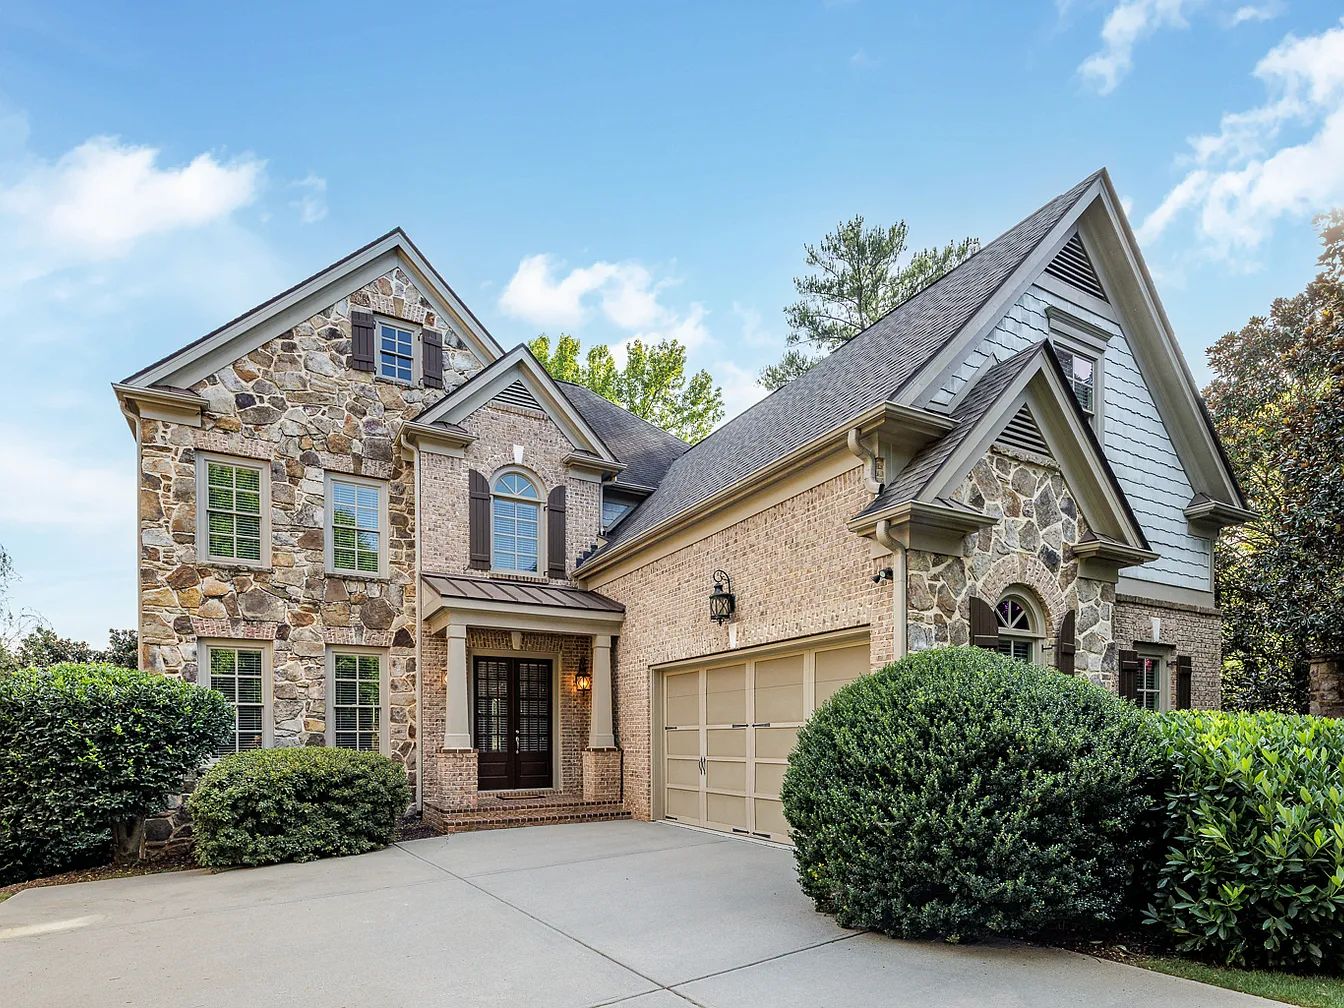   
																See this stunning home in the heart of Sandy Springs 
															 